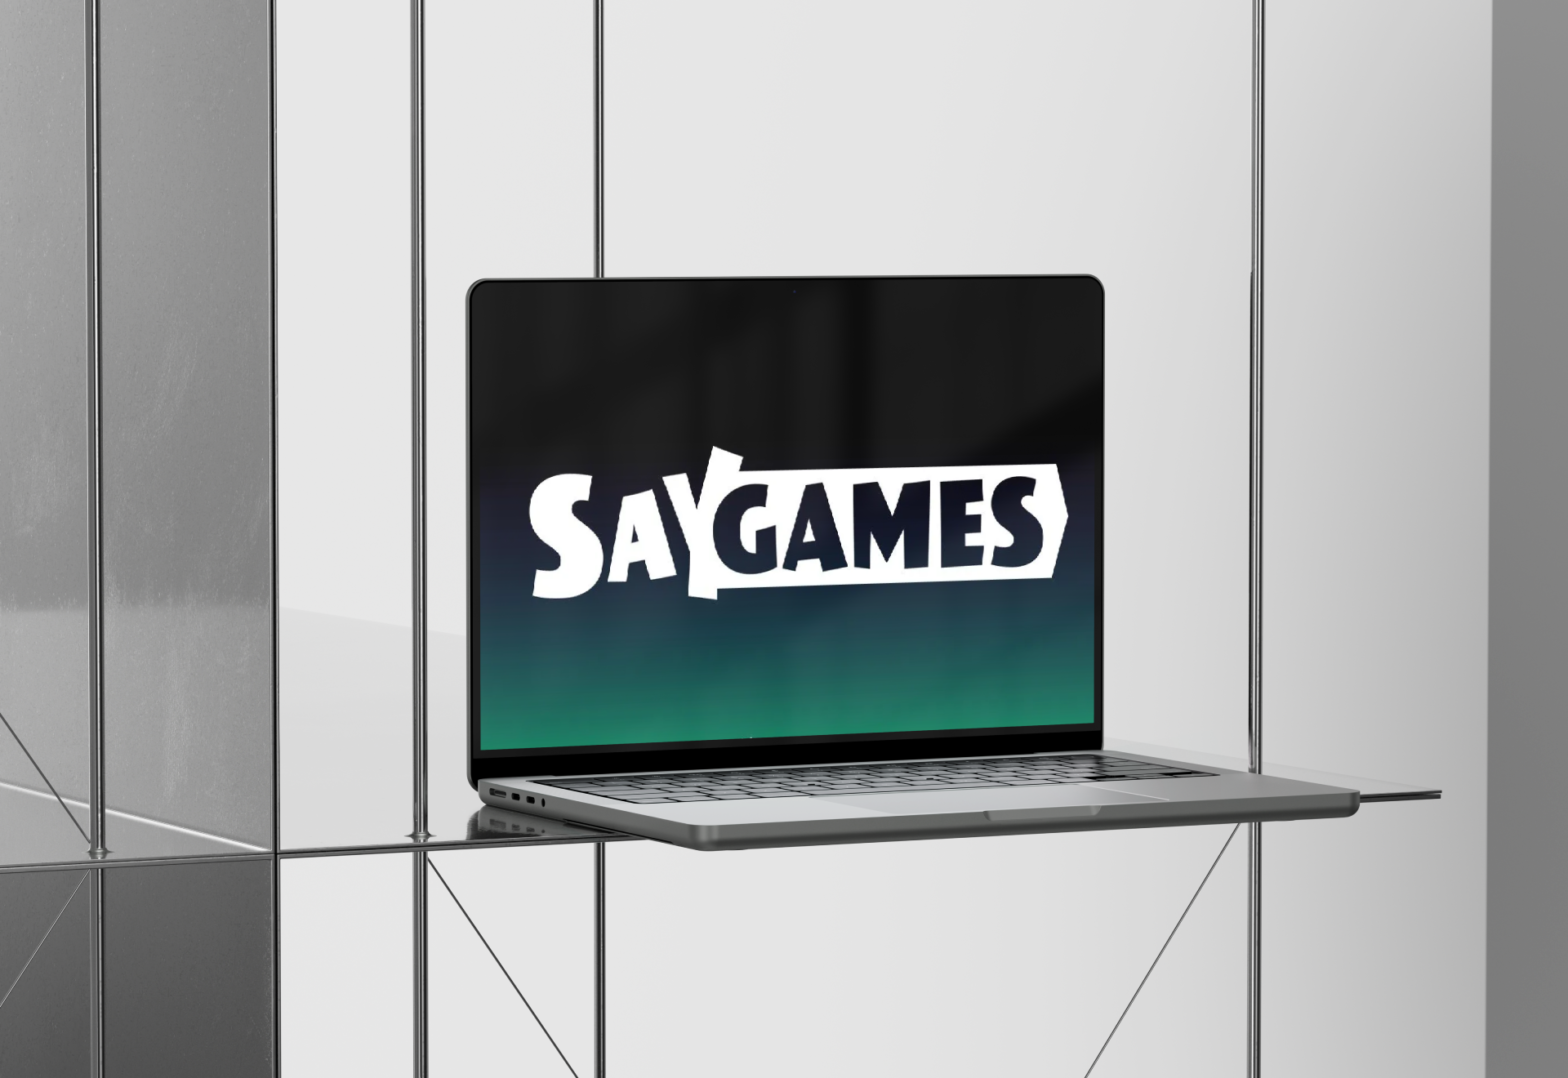 SayGames is focusing on hybrid-casual games